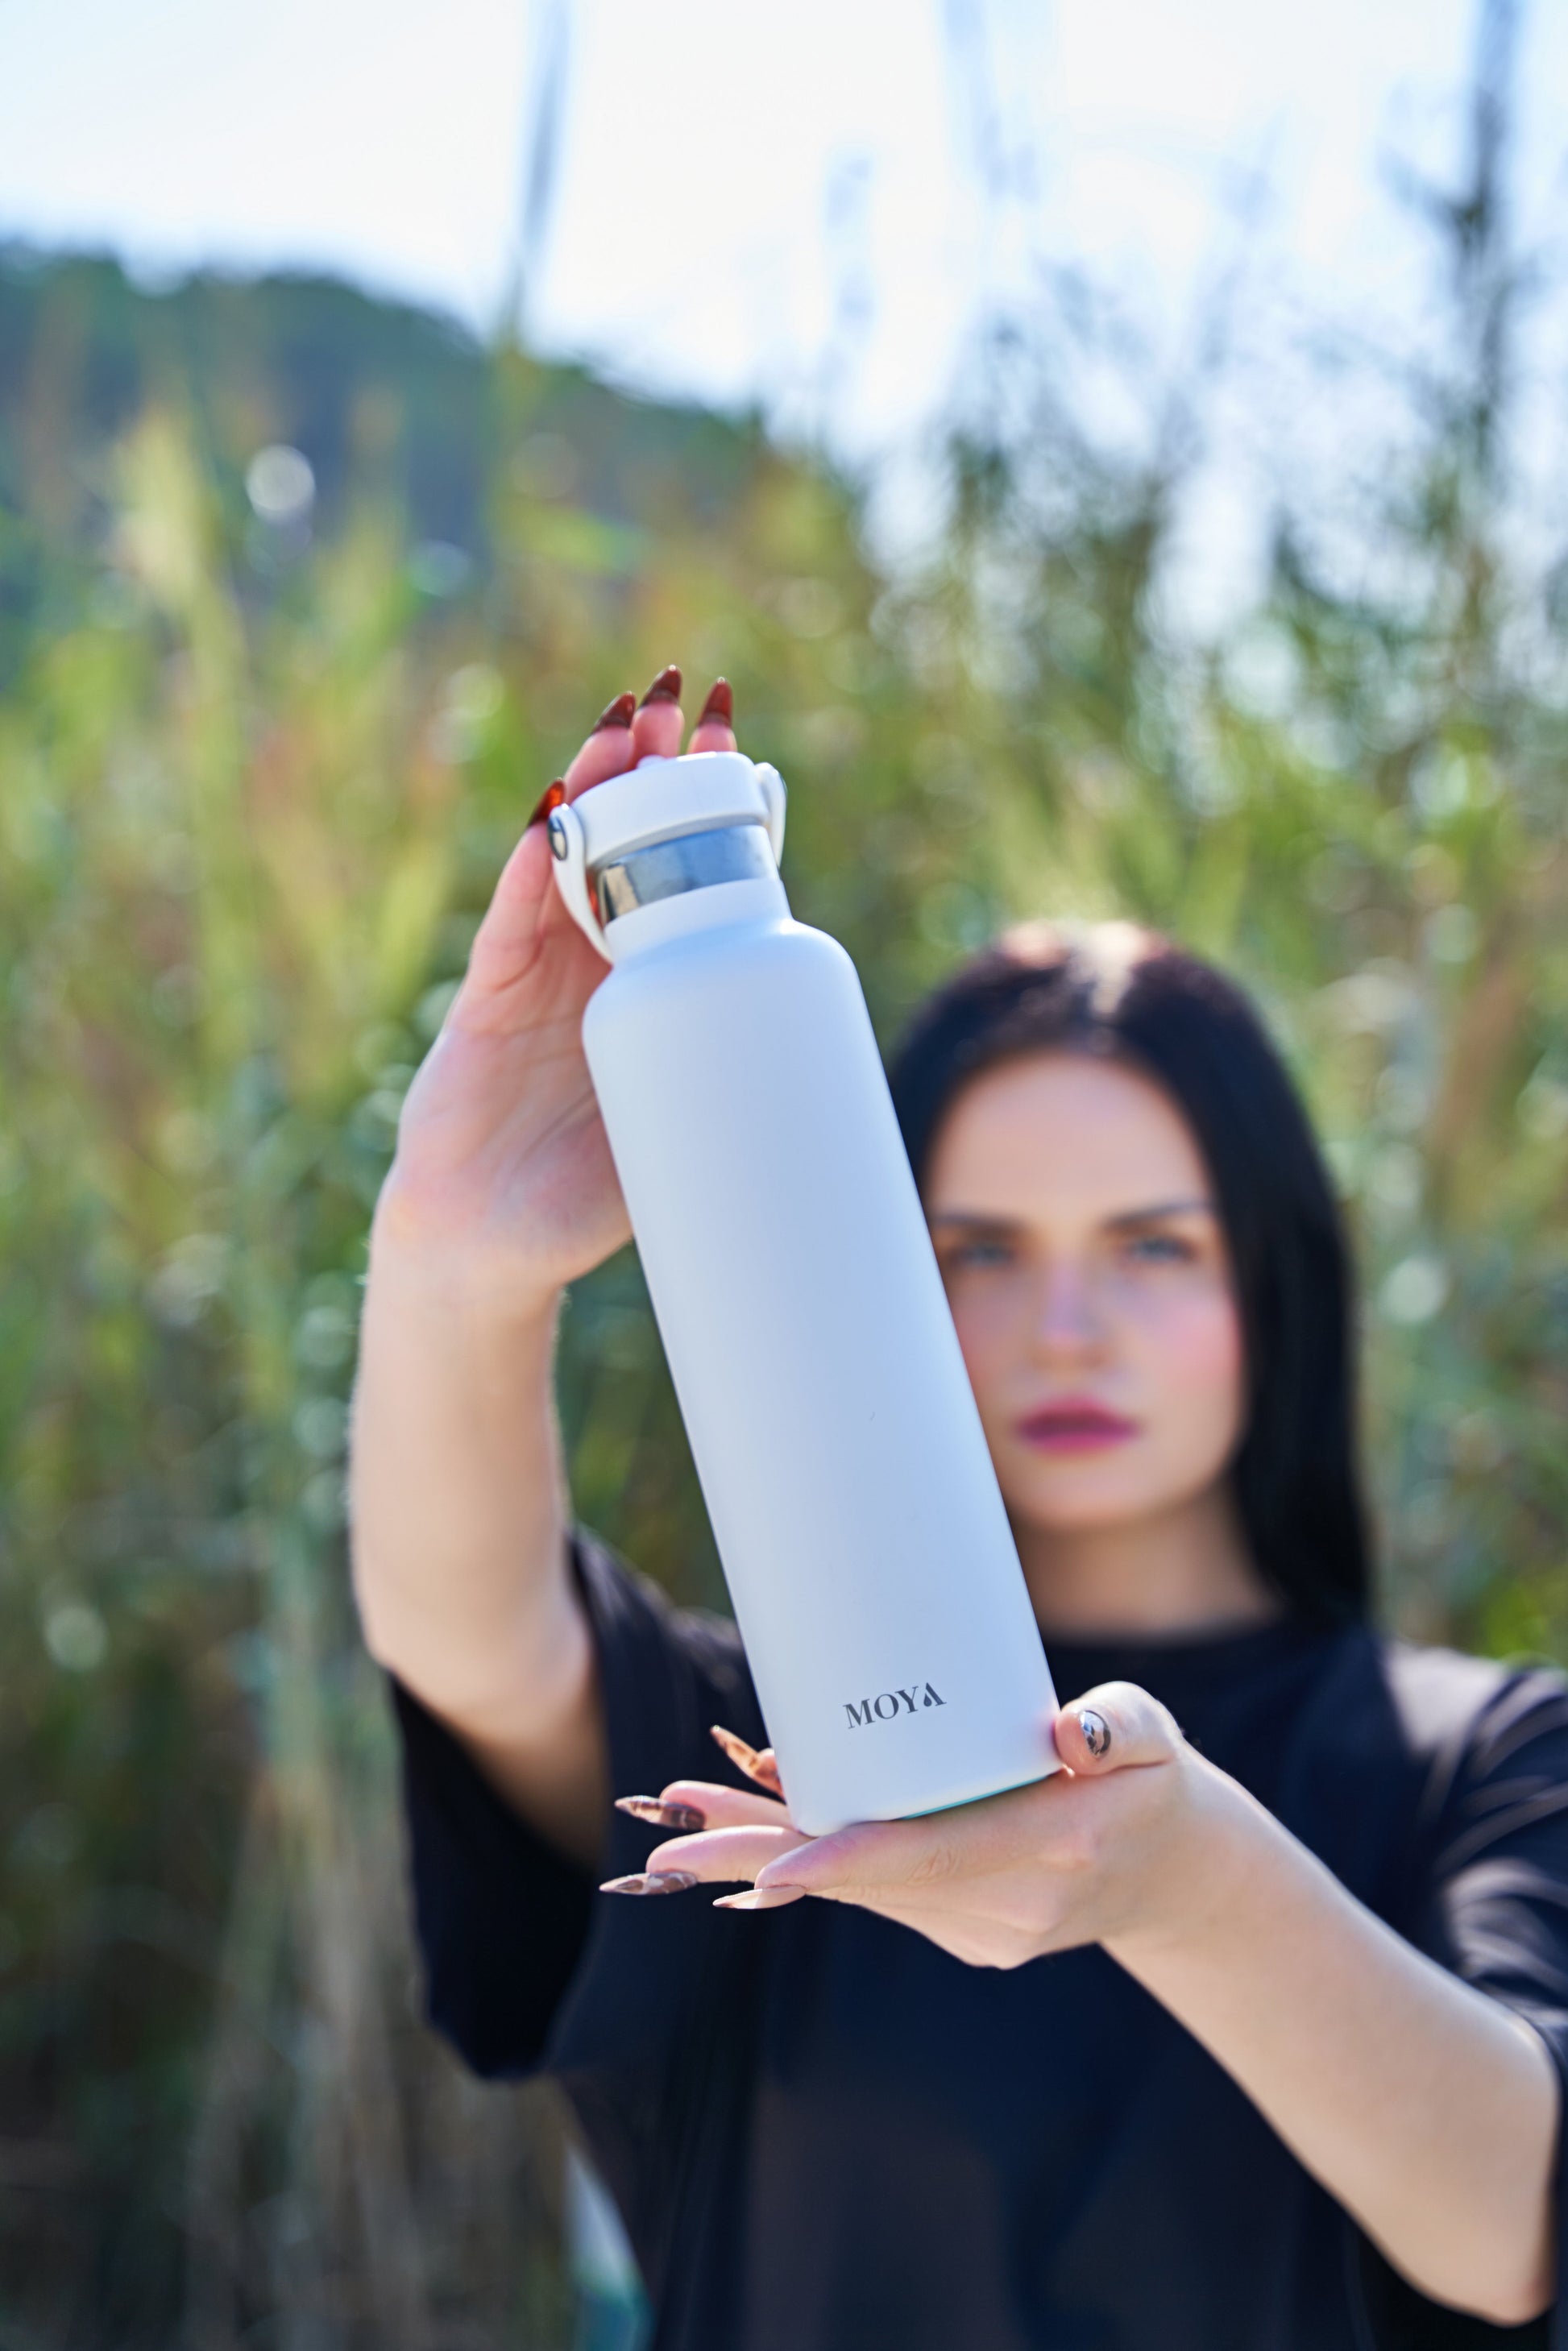 Moya "Black Sea" 700ml Insulated Sustainable Water Bottle - BBQ DXB